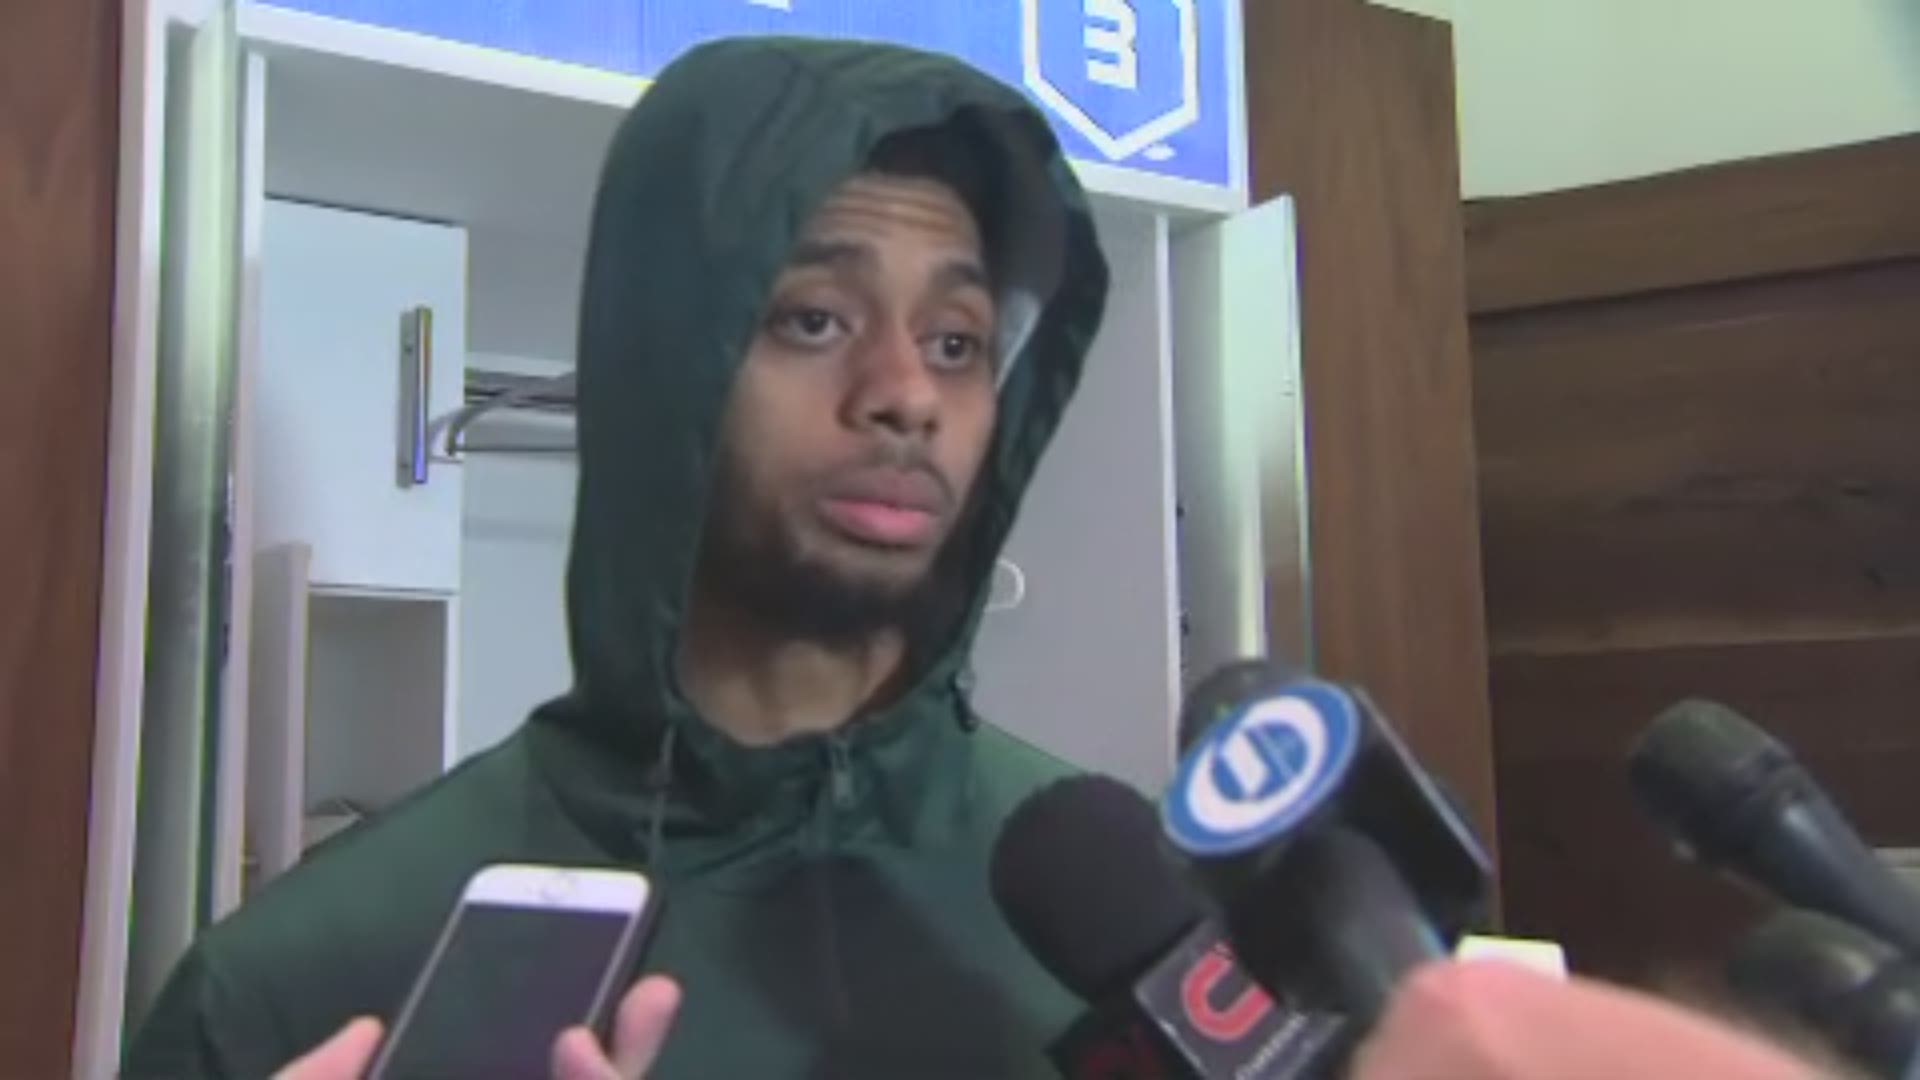 The Toronto Raptors are hoping they don't have to see Jeremy Lamb in the playoffs.